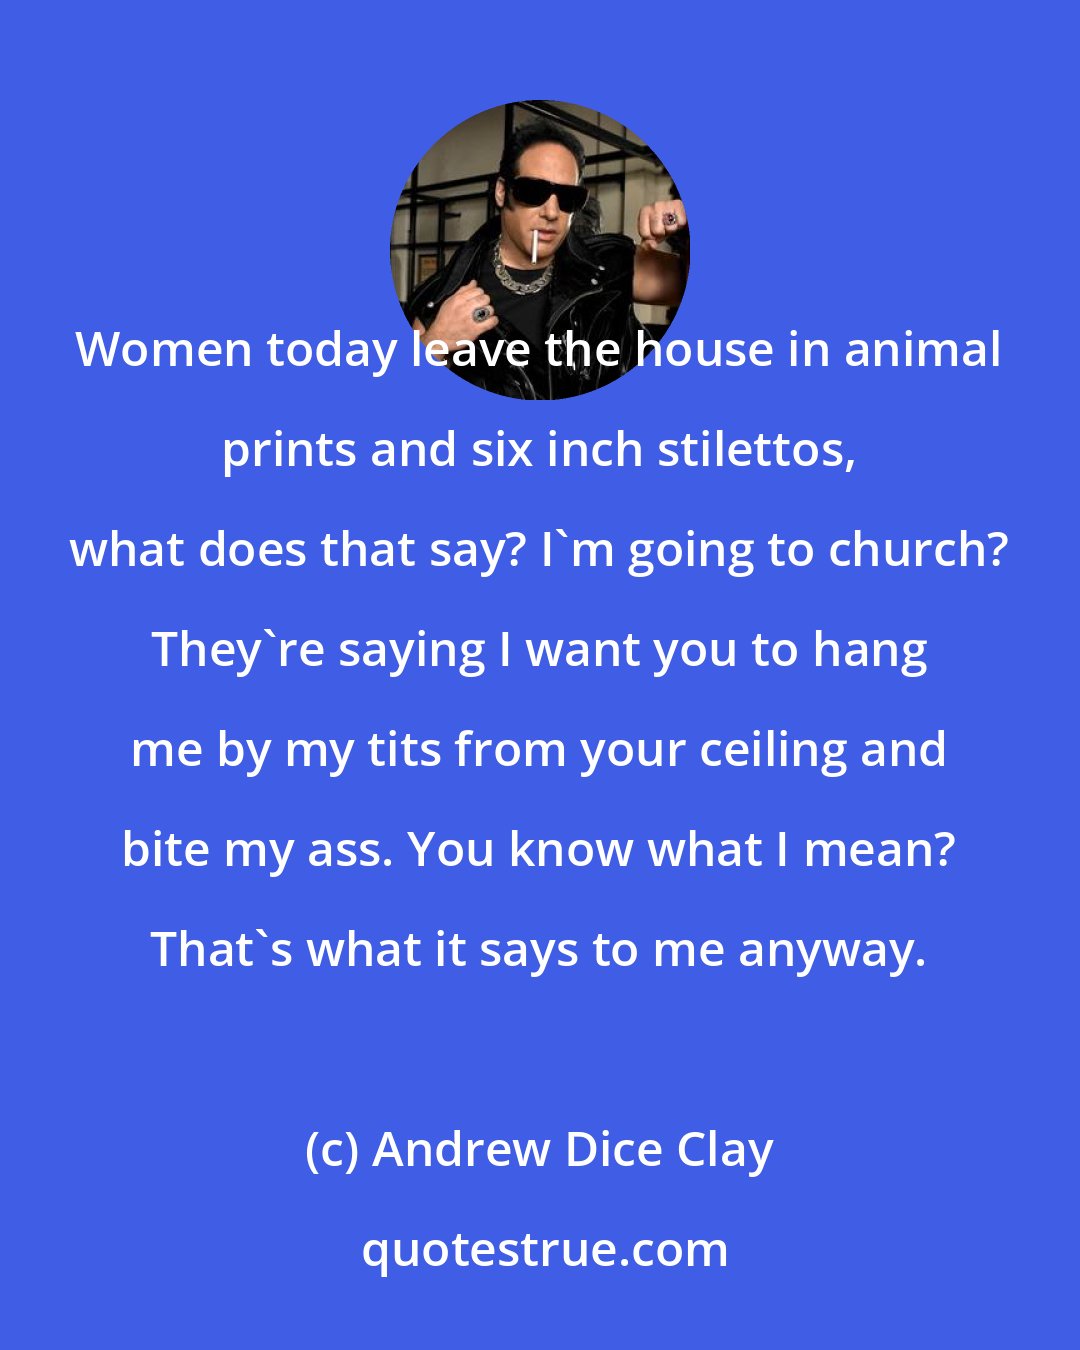 Andrew Dice Clay: Women today leave the house in animal prints and six inch stilettos, what does that say? I'm going to church? They're saying I want you to hang me by my tits from your ceiling and bite my ass. You know what I mean? That's what it says to me anyway.